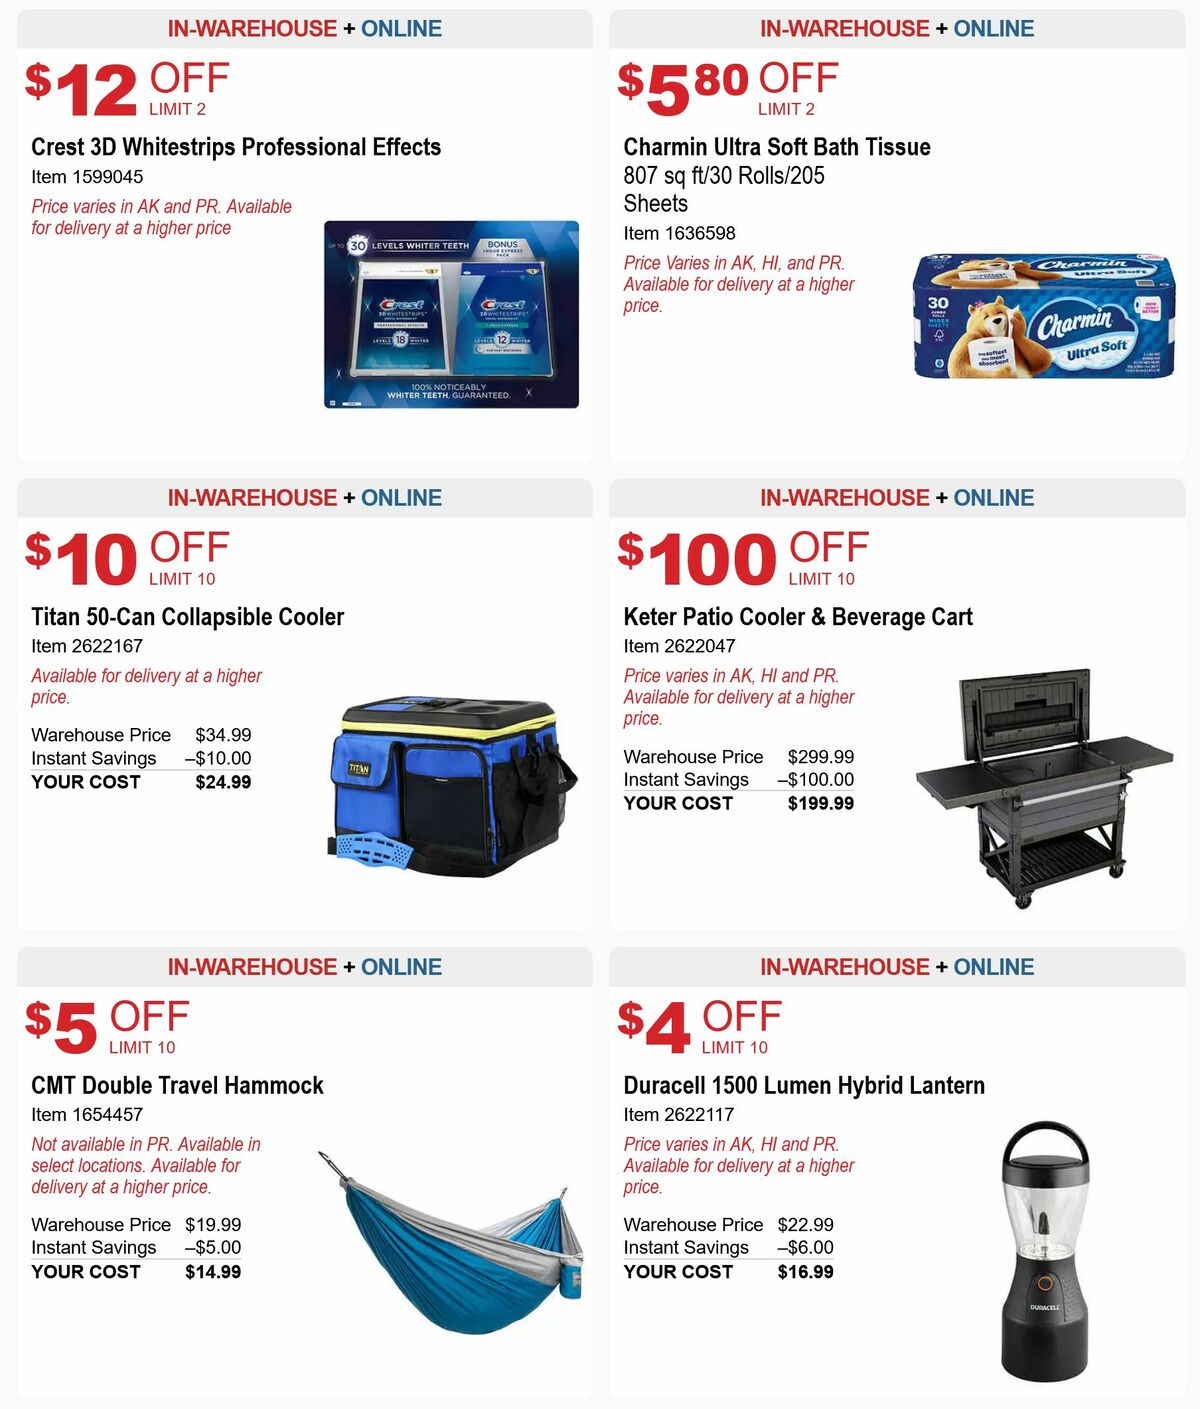 Costco Hot Buys Weekly Ad from May 6